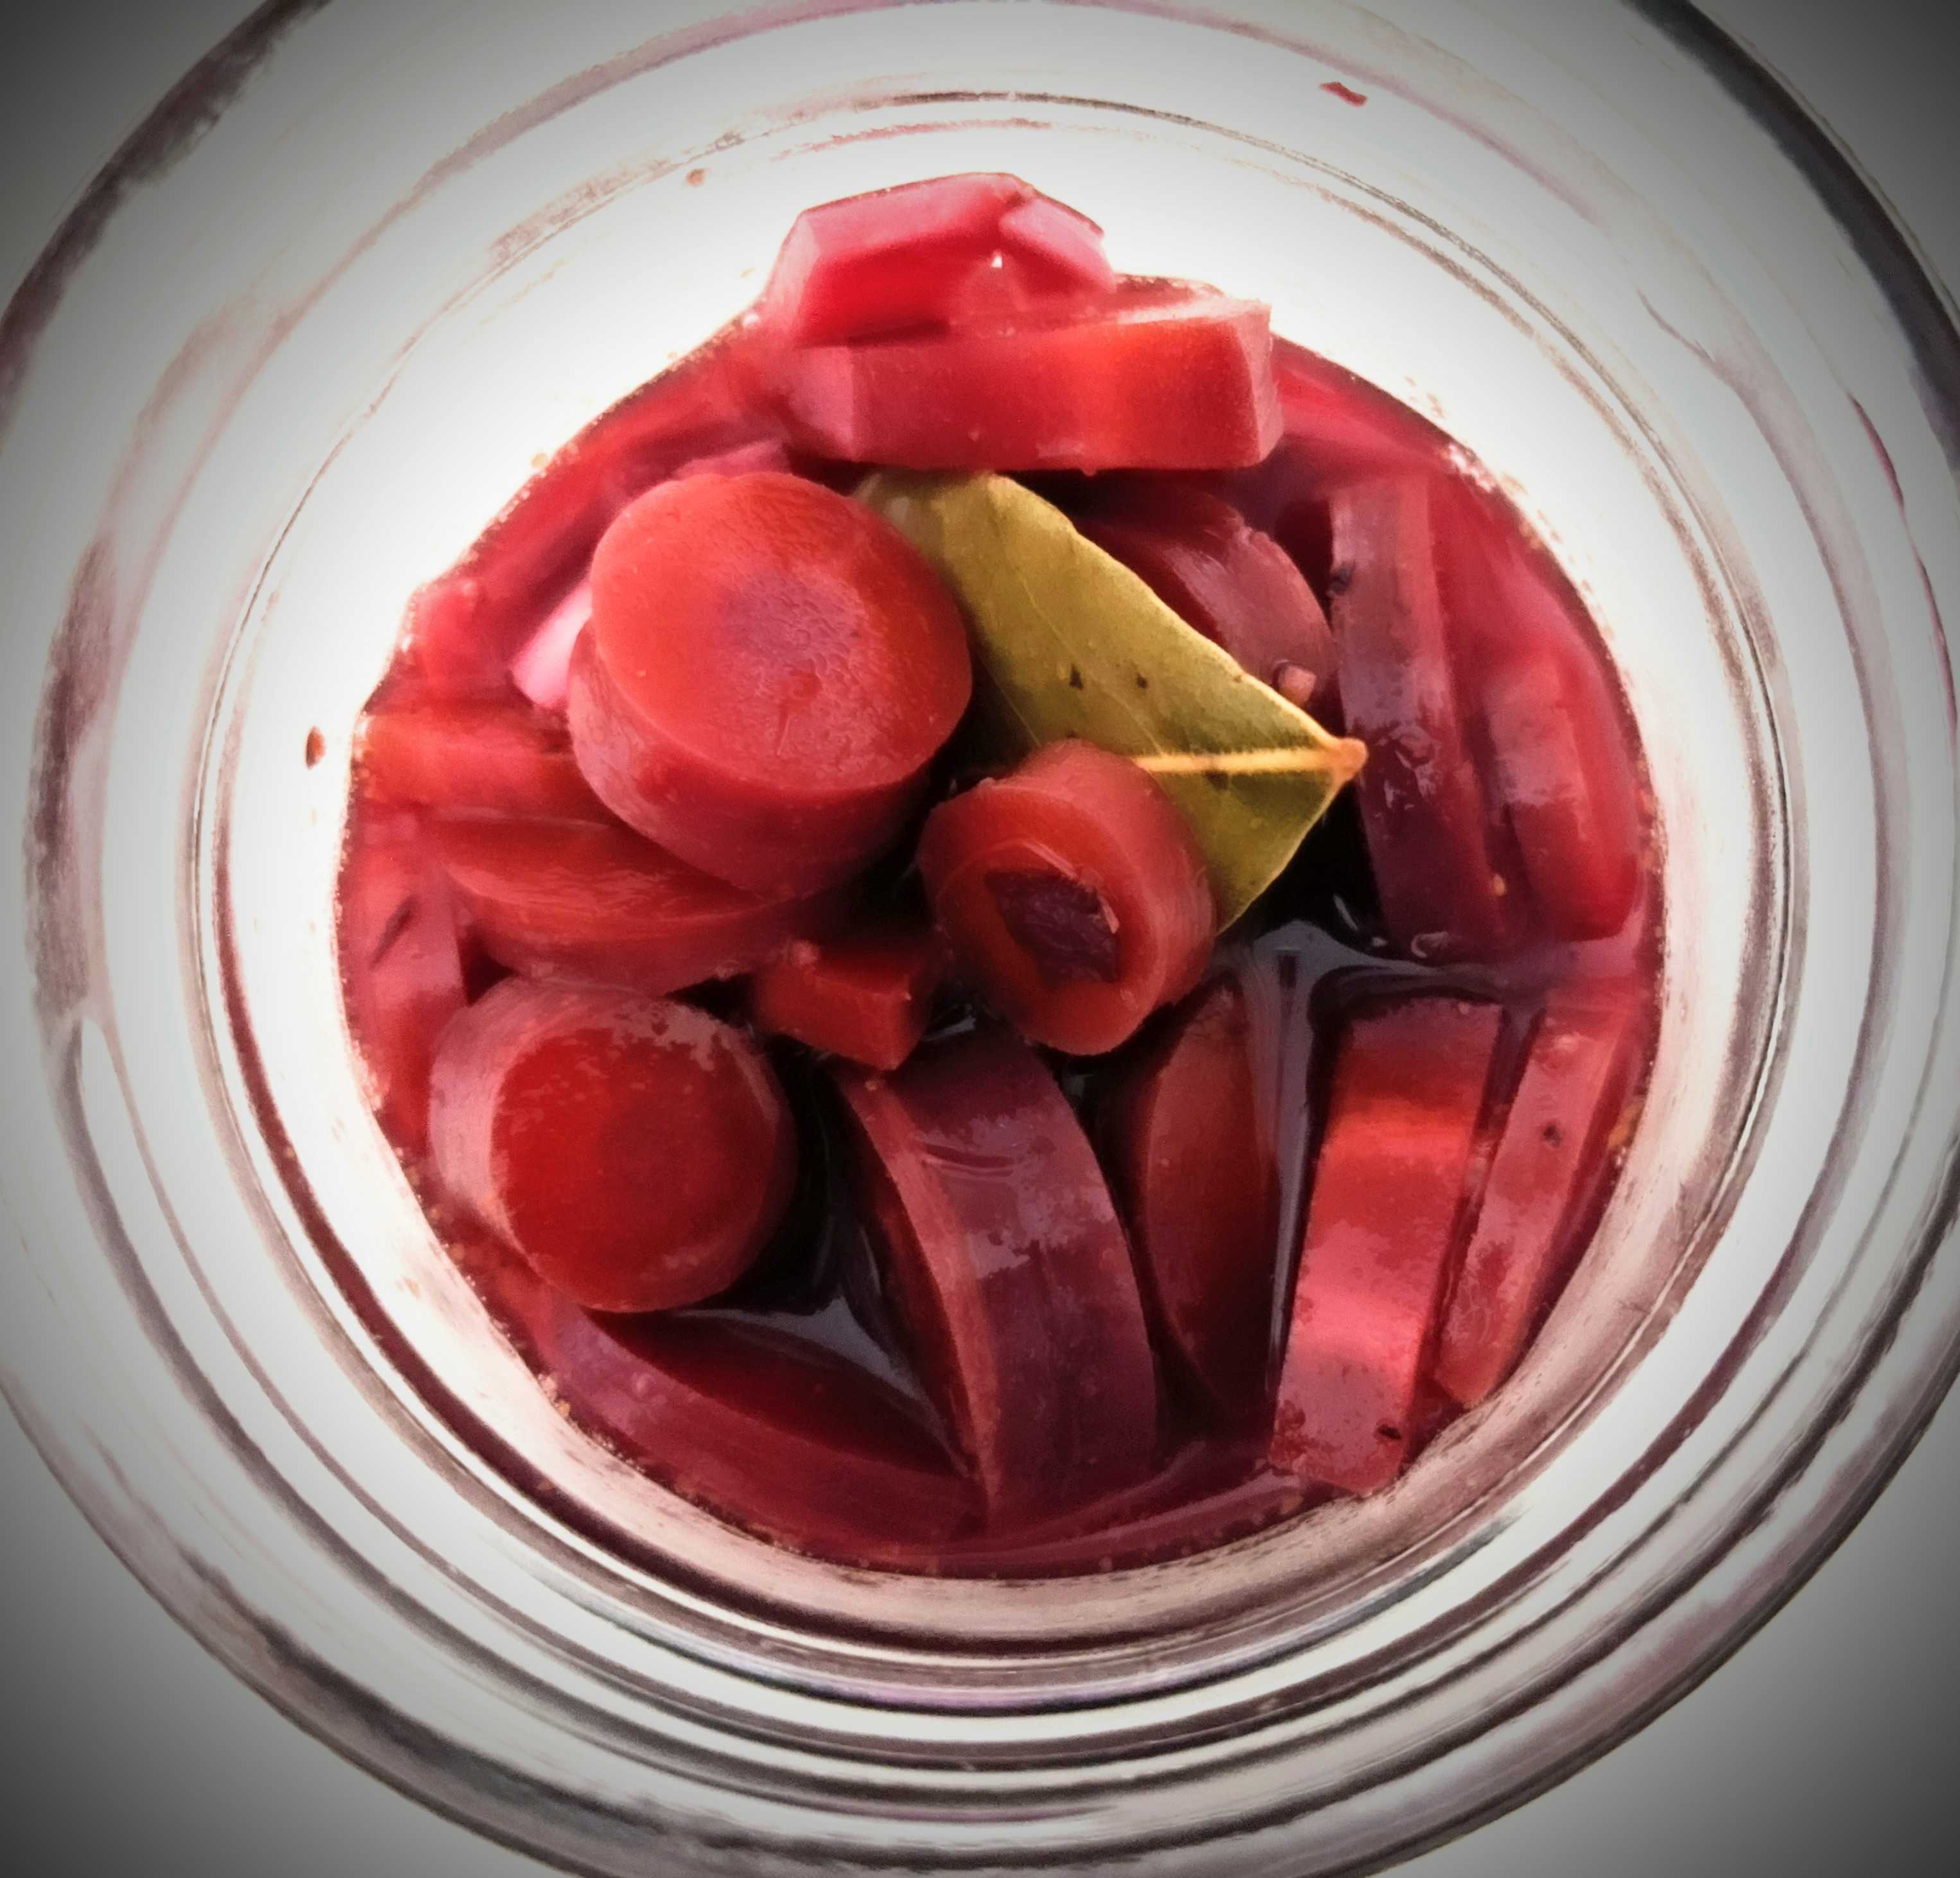 Purple pickled carrots in a jar. They're purple because I used purple carrots to make the pickles. I didn't use beet juice the way some people do to make things purple, because I like things that taste good, and beet juice is the opposite of that.